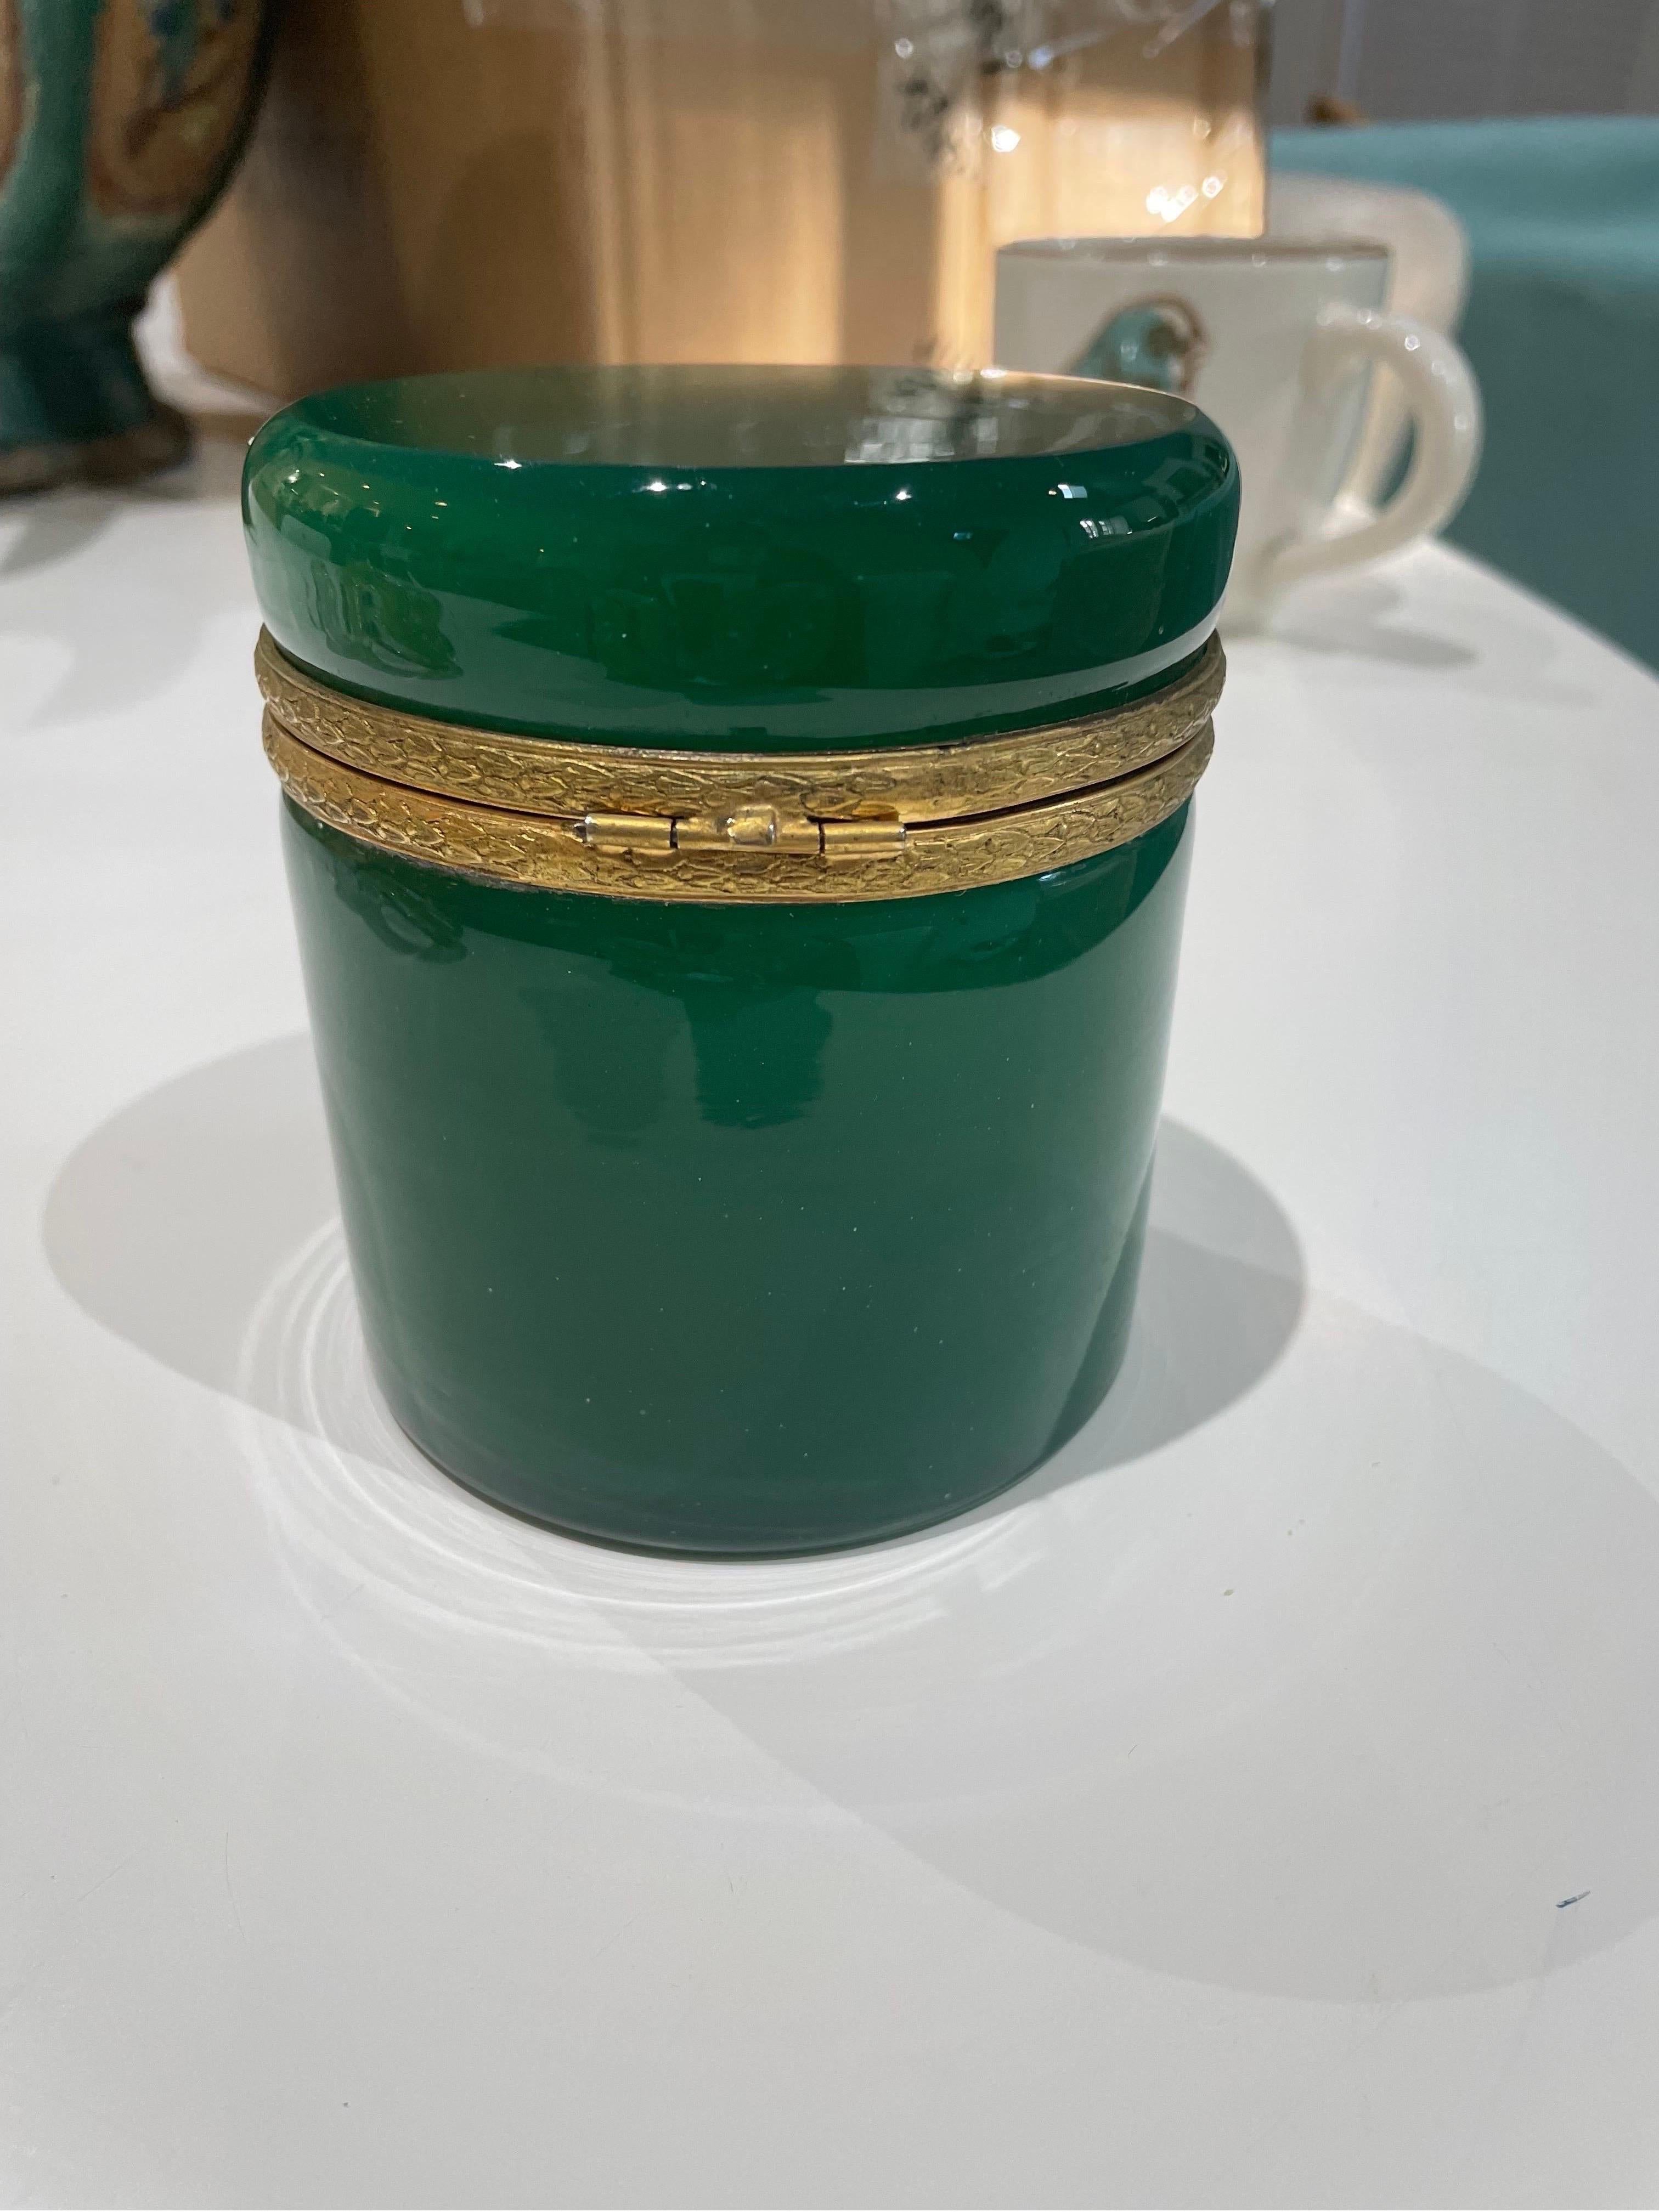 This is a vintage emerald green colored opaline jar with gold ormolou probably from 1970s.